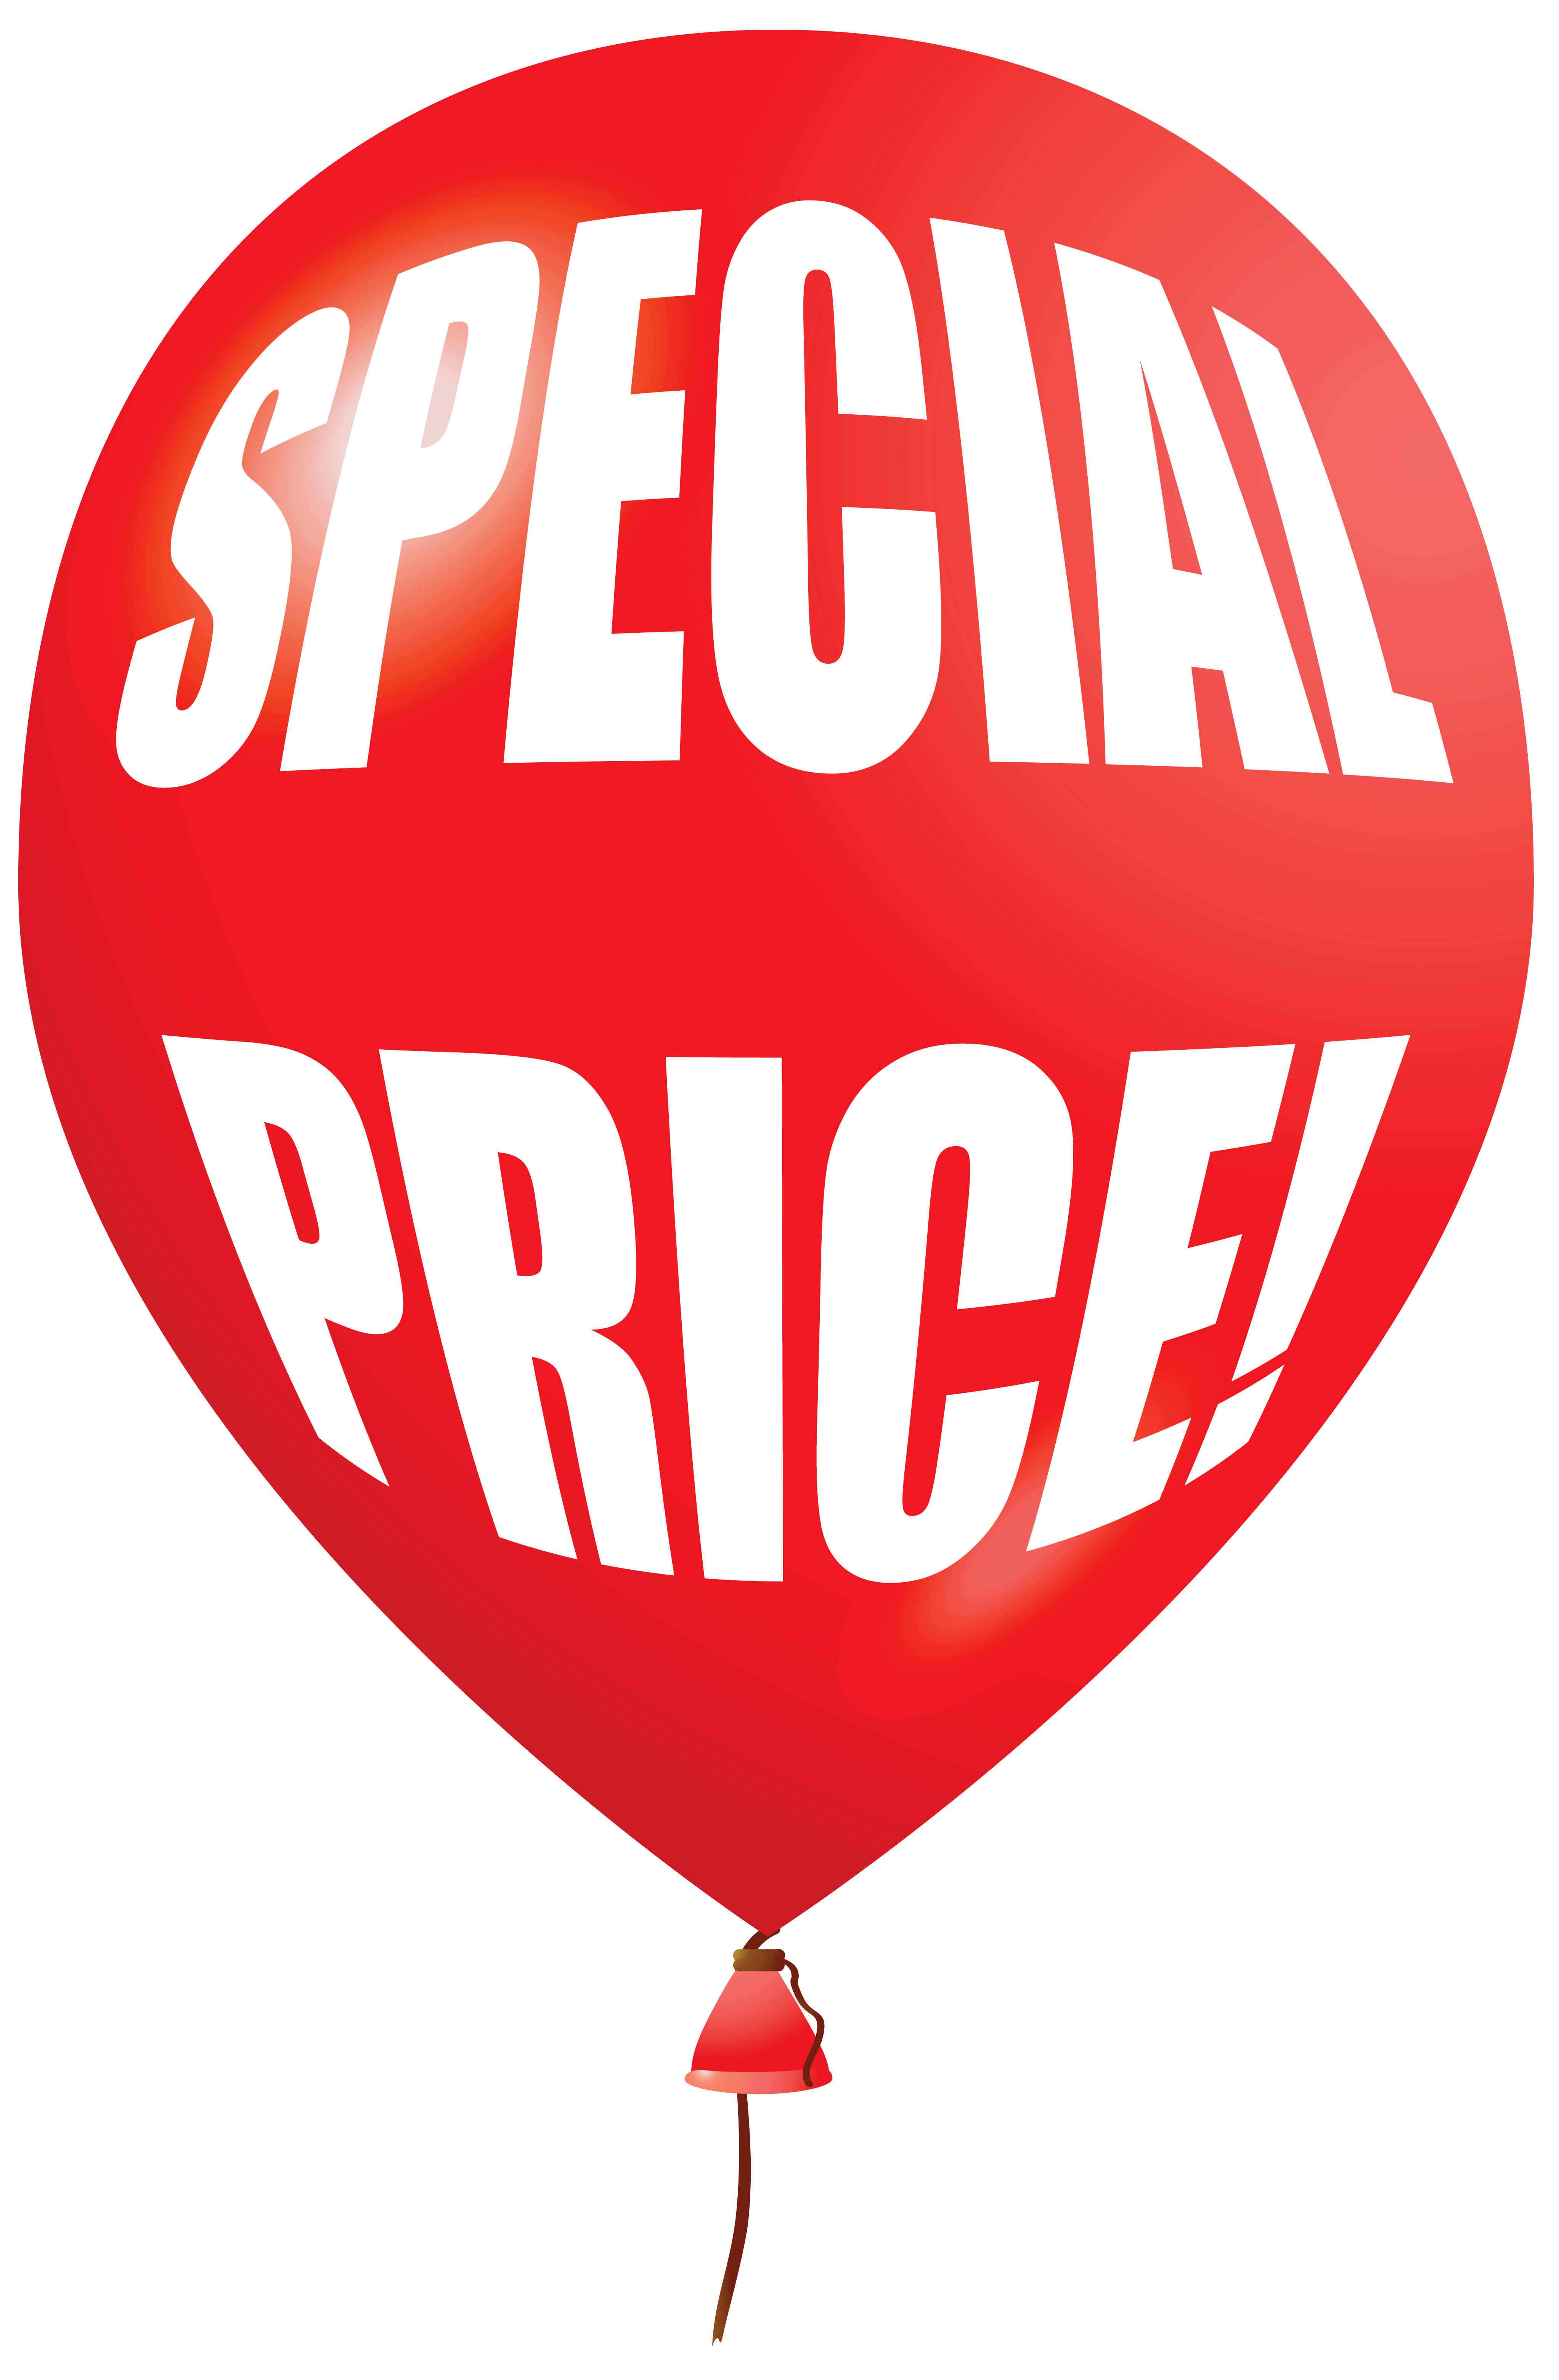 Download Sticker Facebook Price Special Balloon Png File Hd Hq Png Image Freepngimg